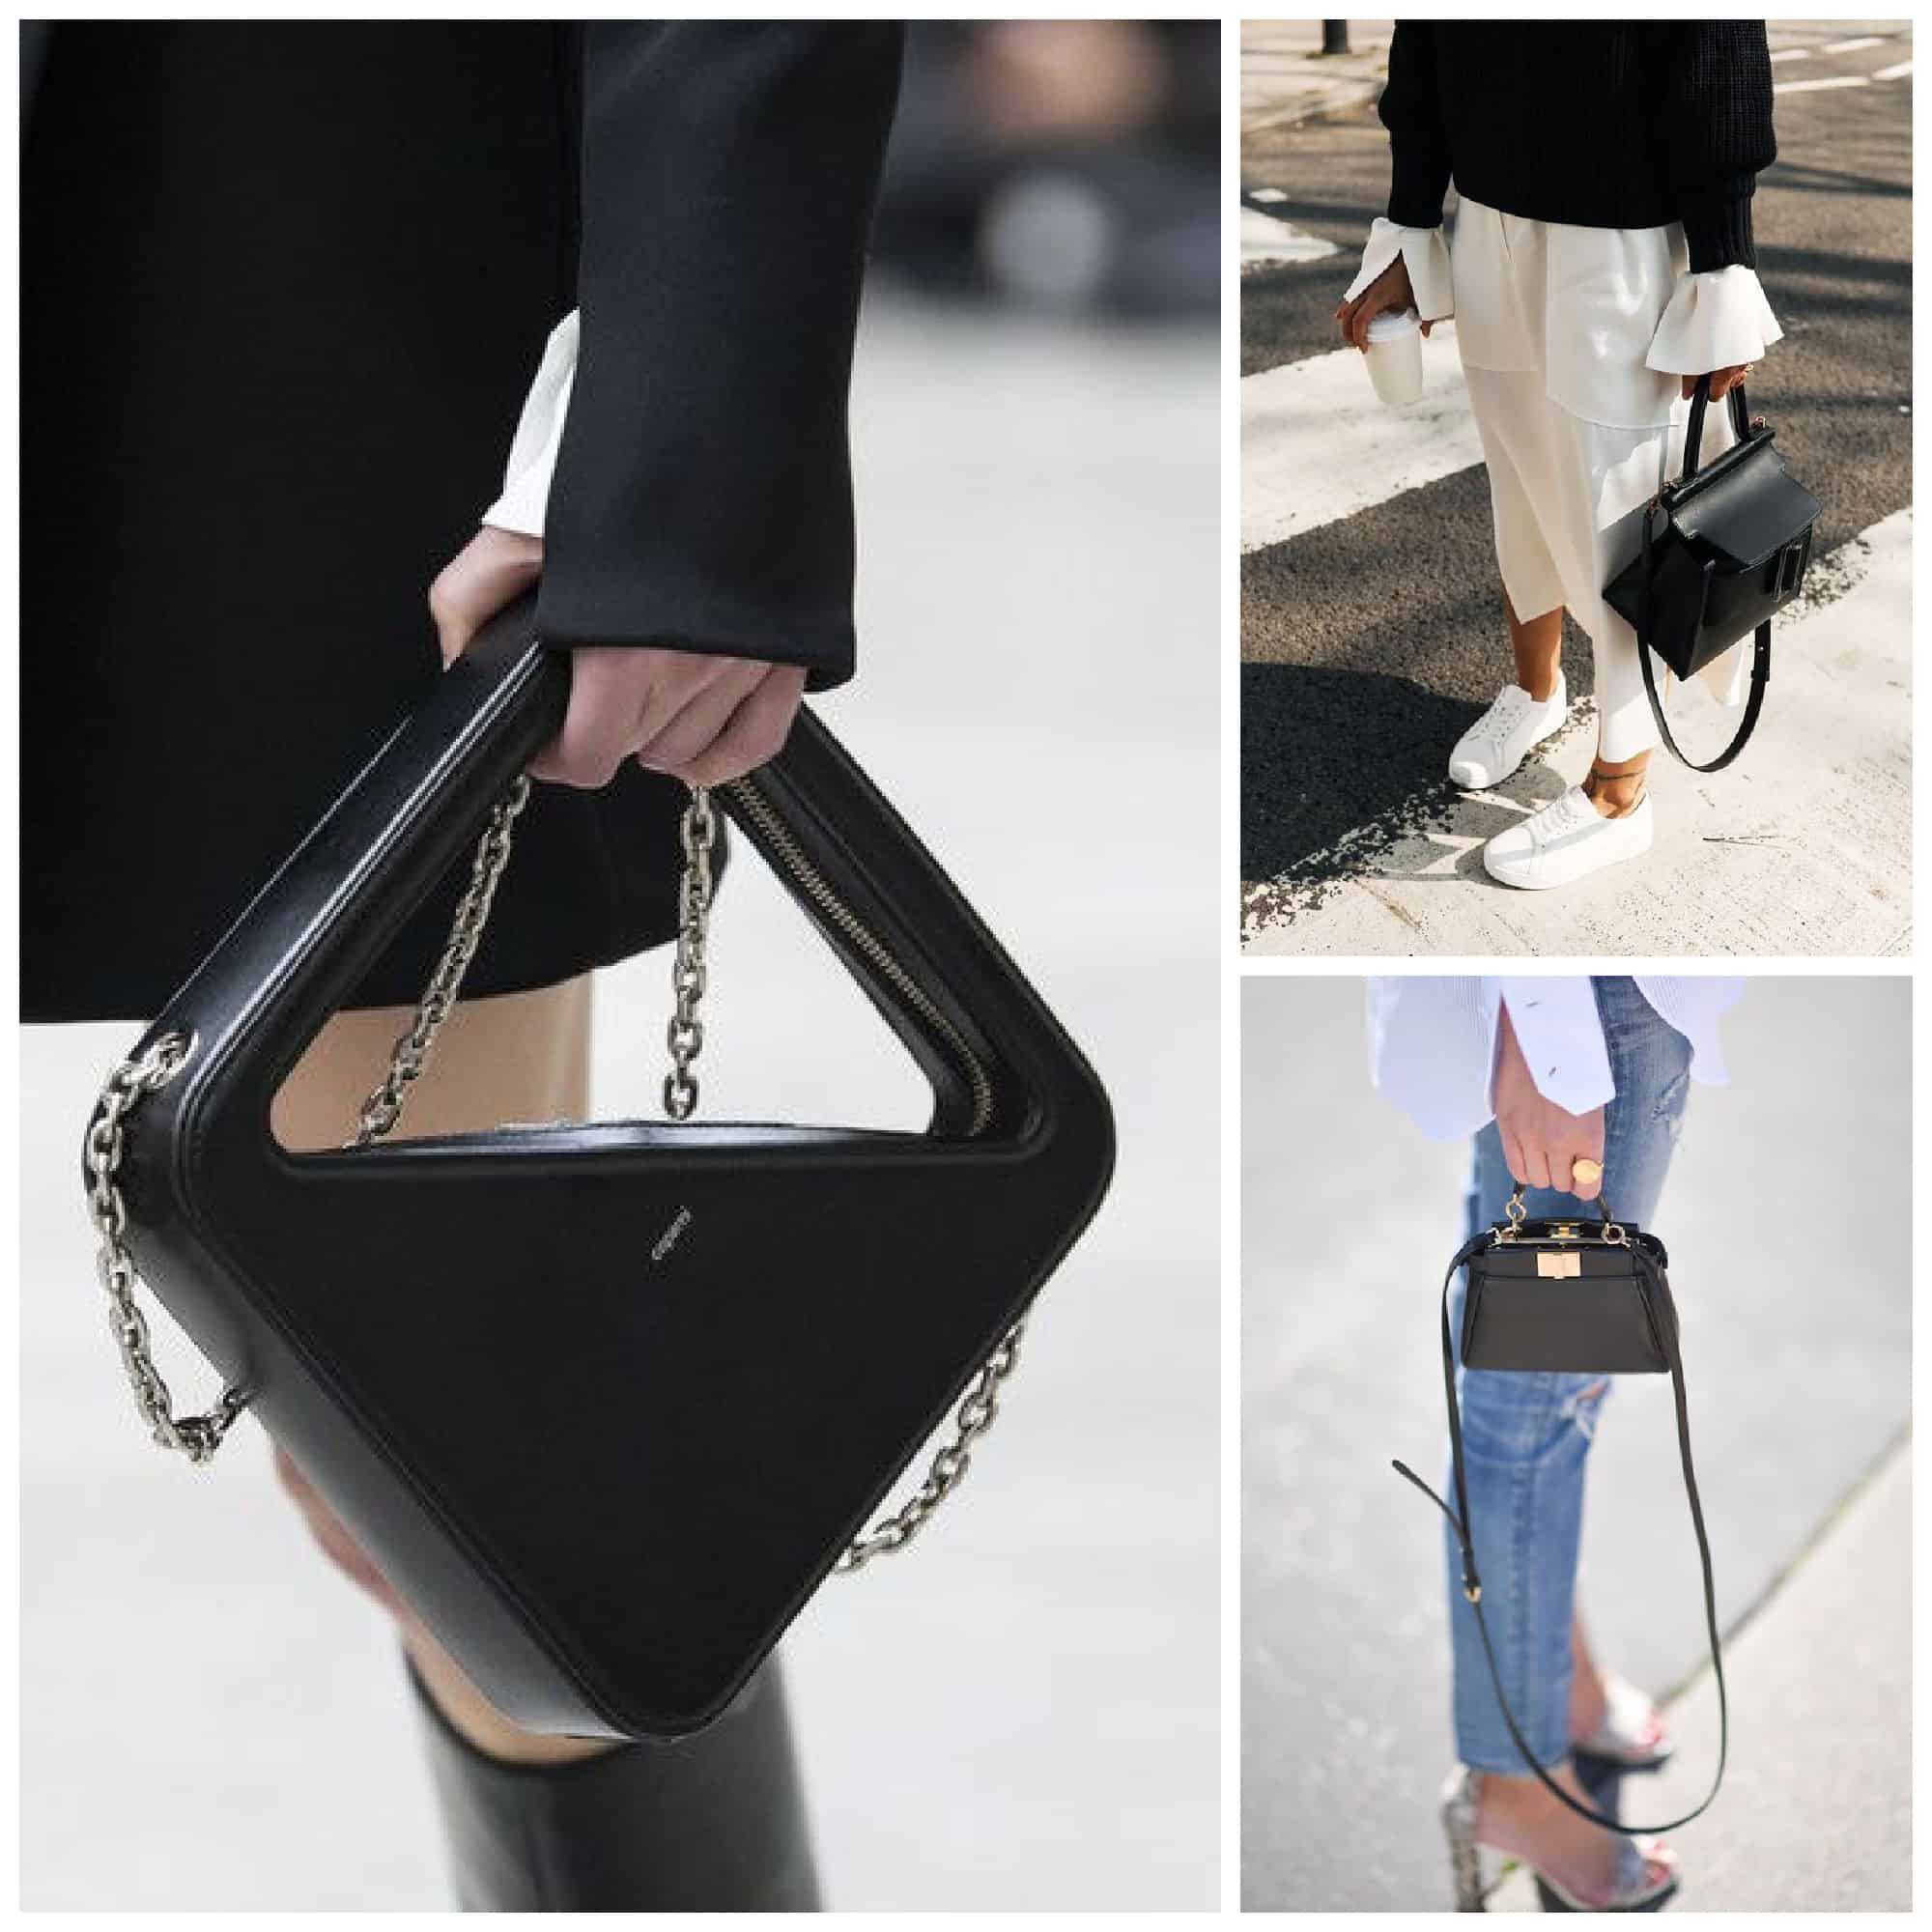 The 5 Celeb-Favorite Designer Bags That Will Never Go Out of Style